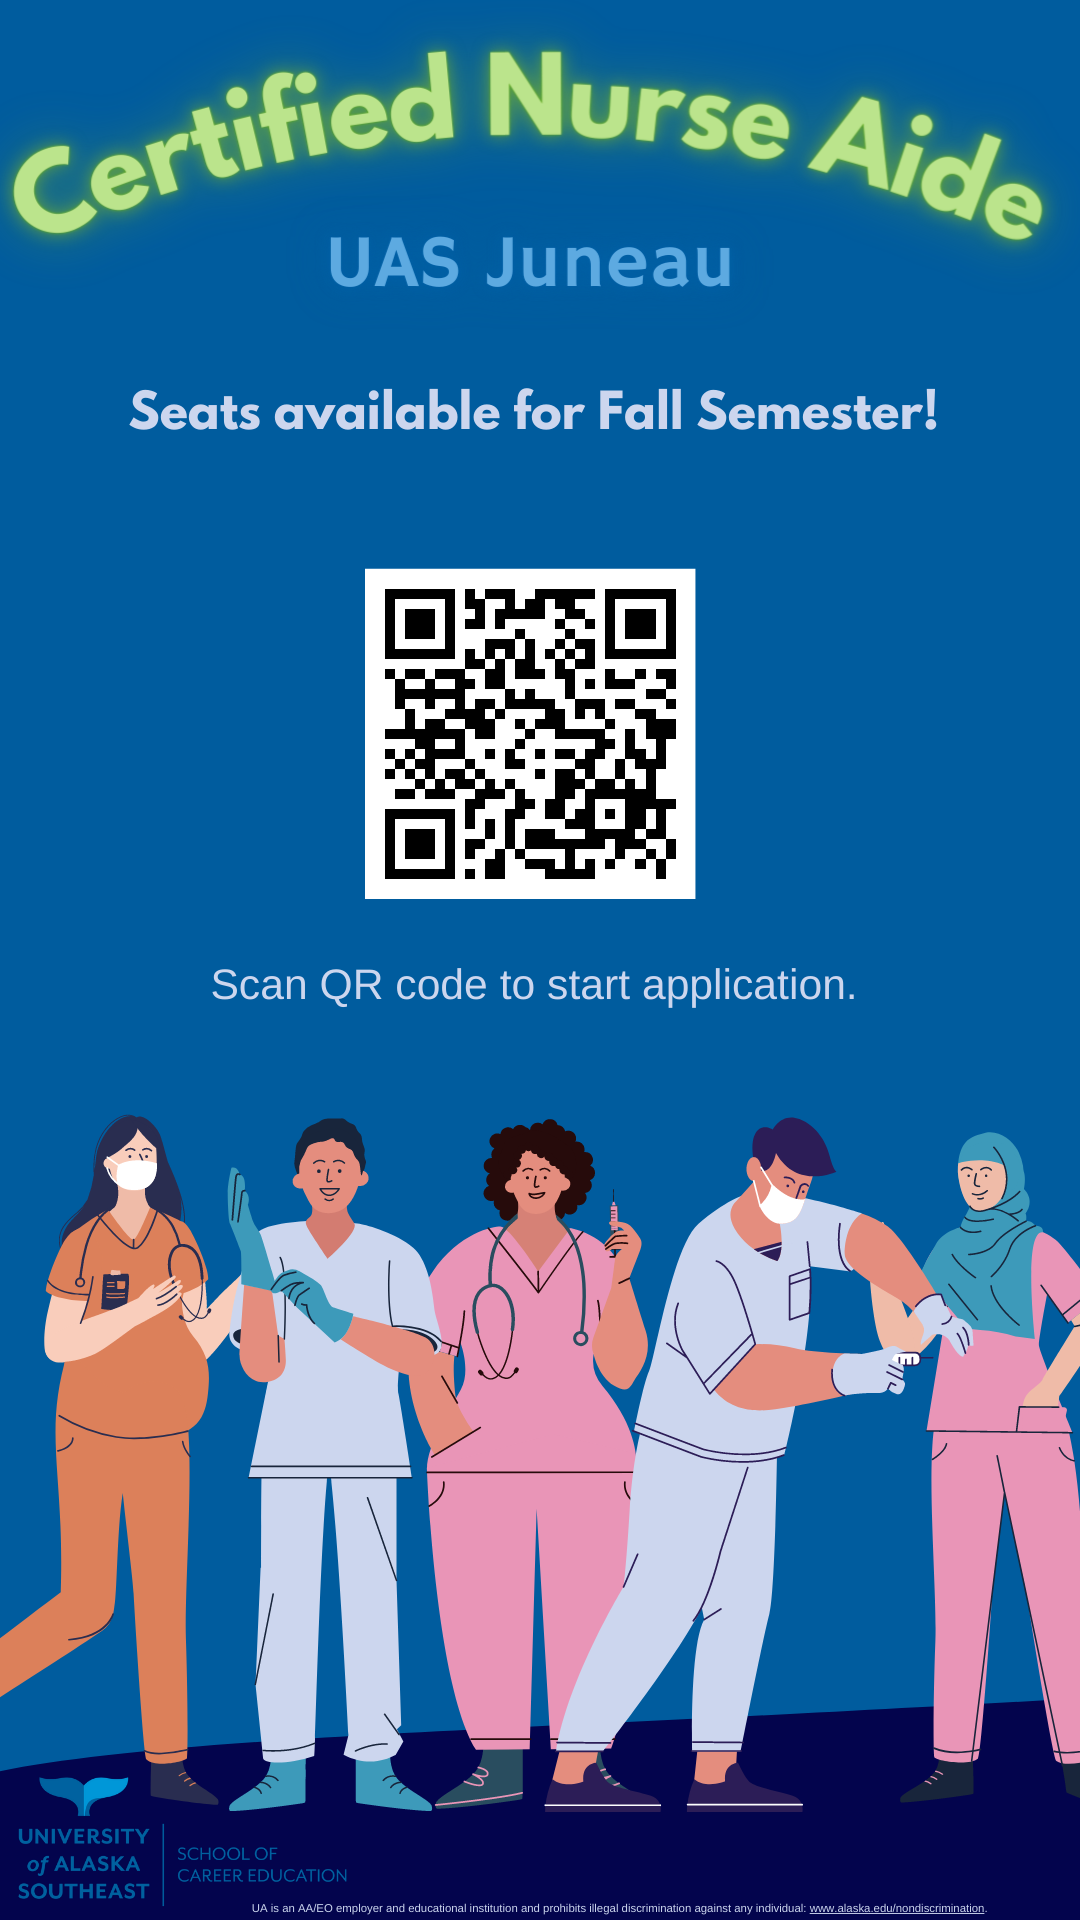 Certified Nurse Aid training available in Juneau, AK for the Fall semester. Scan QR code to start application. 